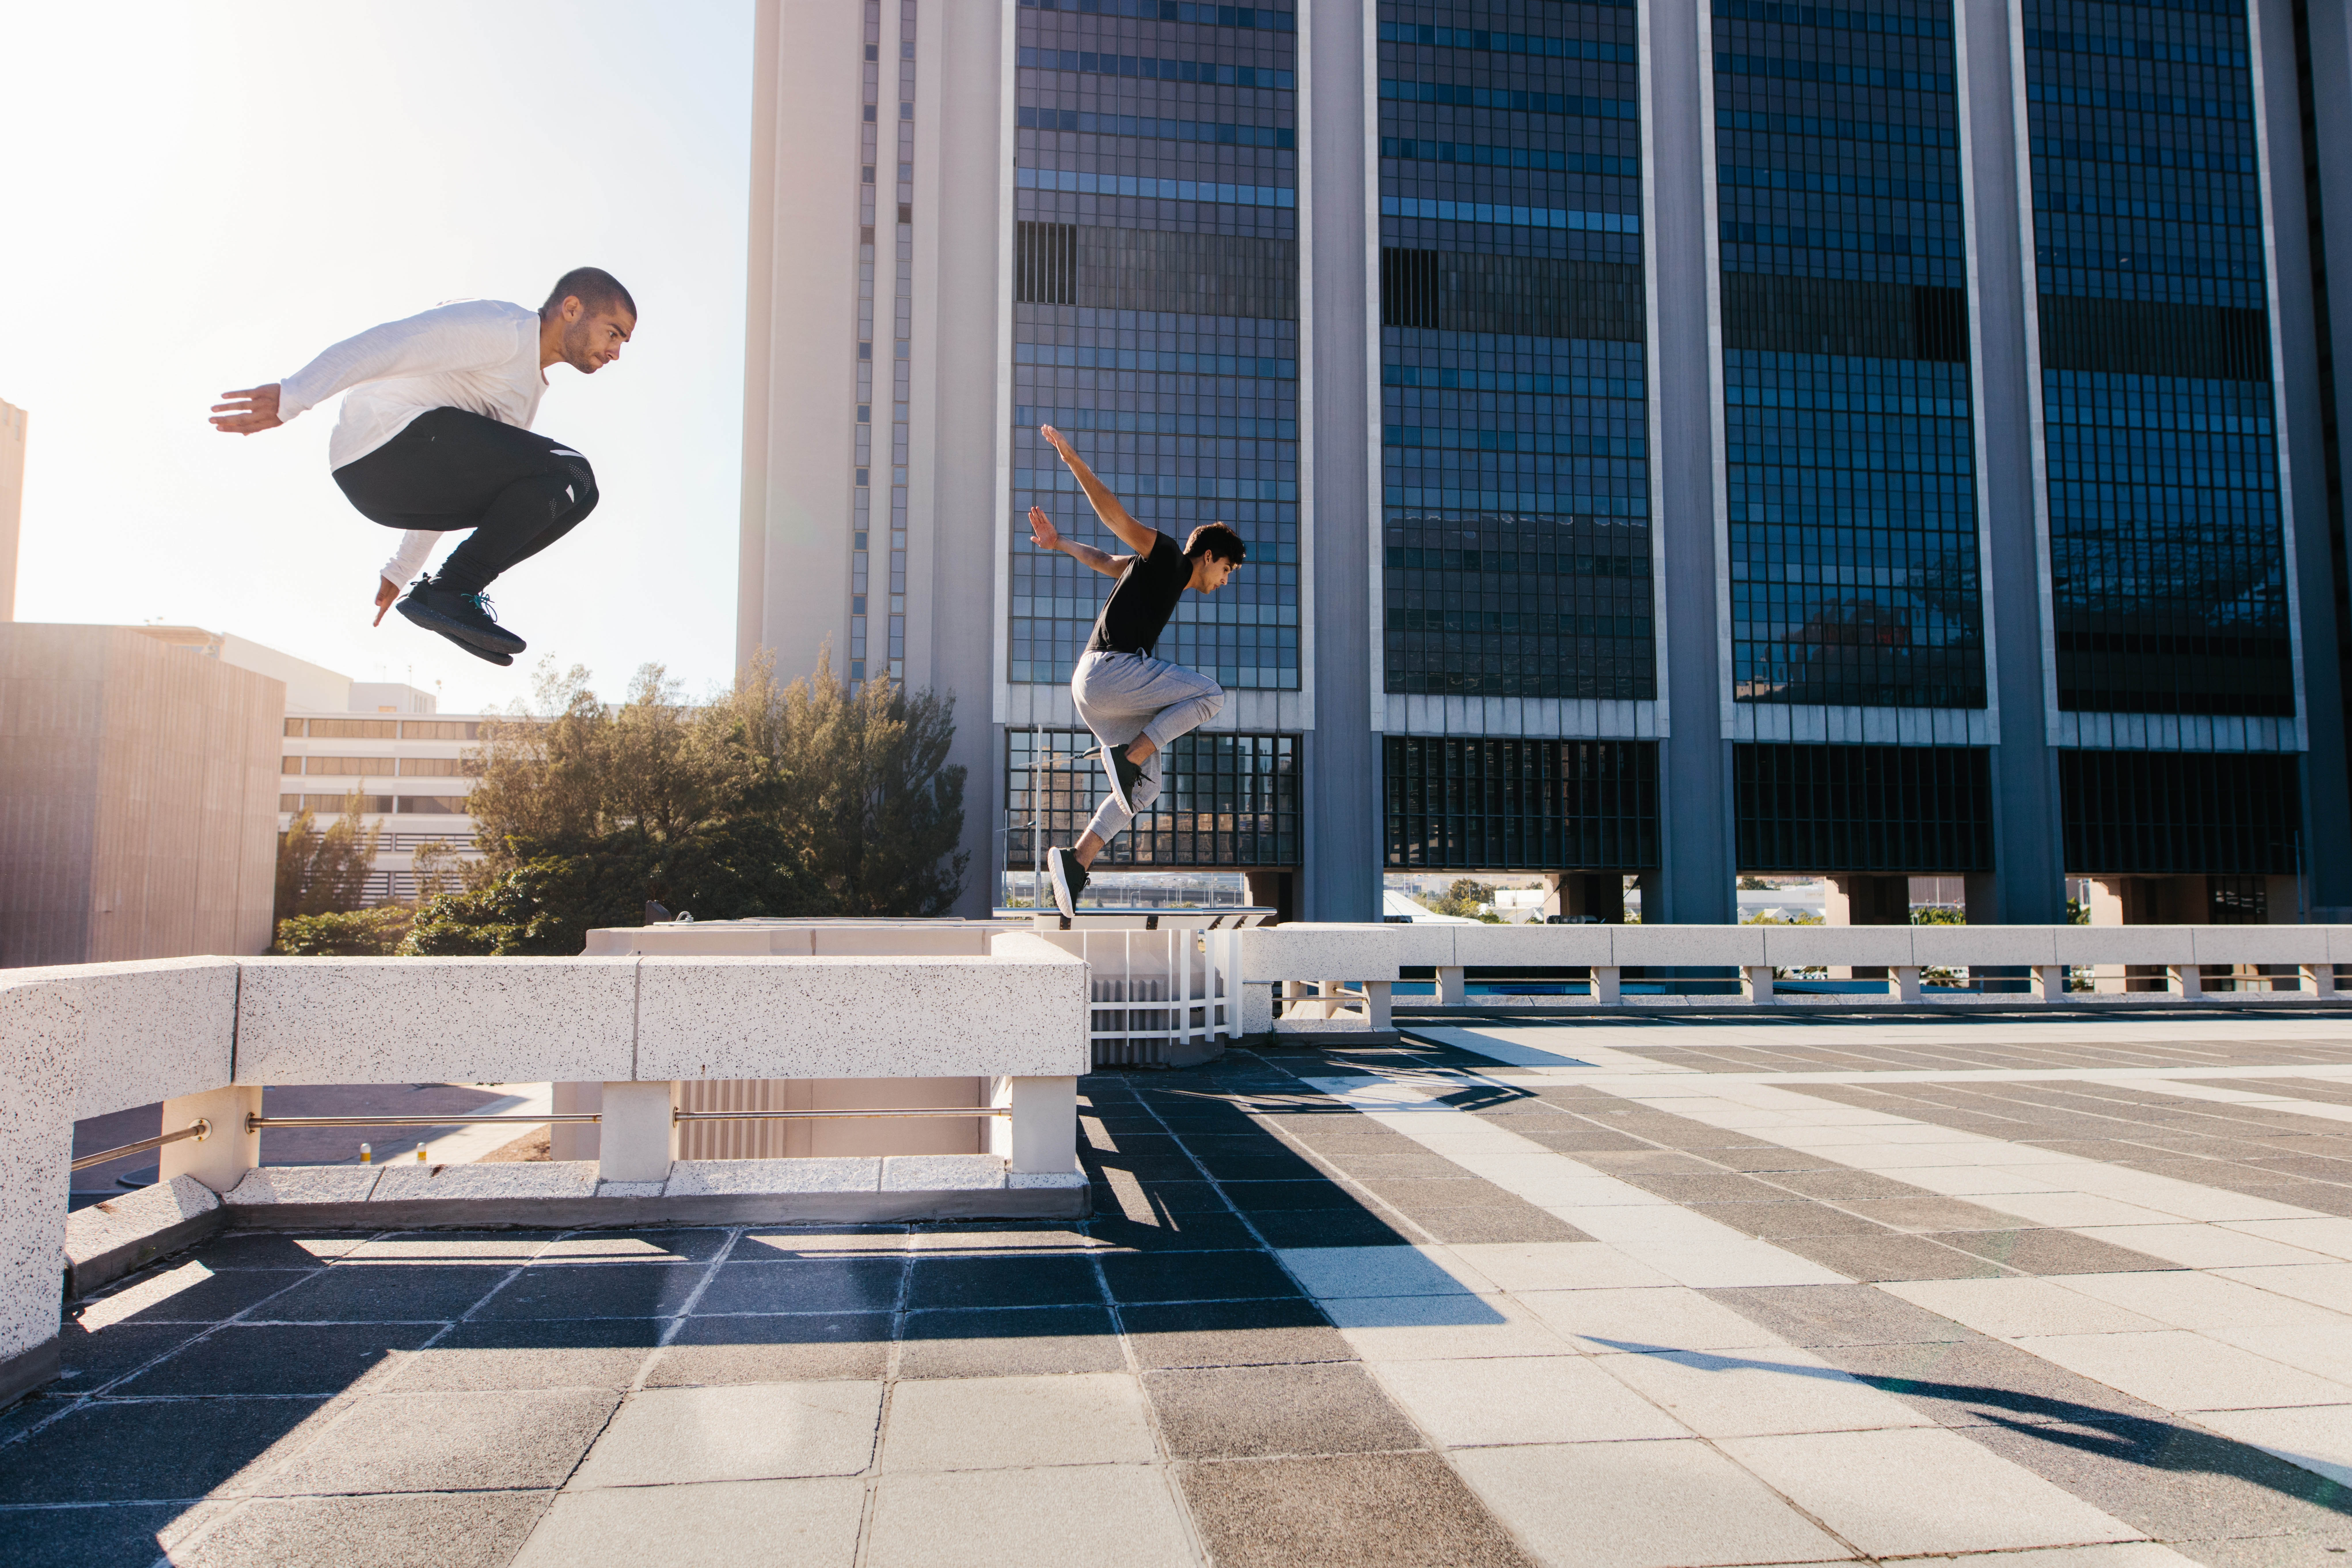 Two young Latino men jumping off of concrete barriers in a city